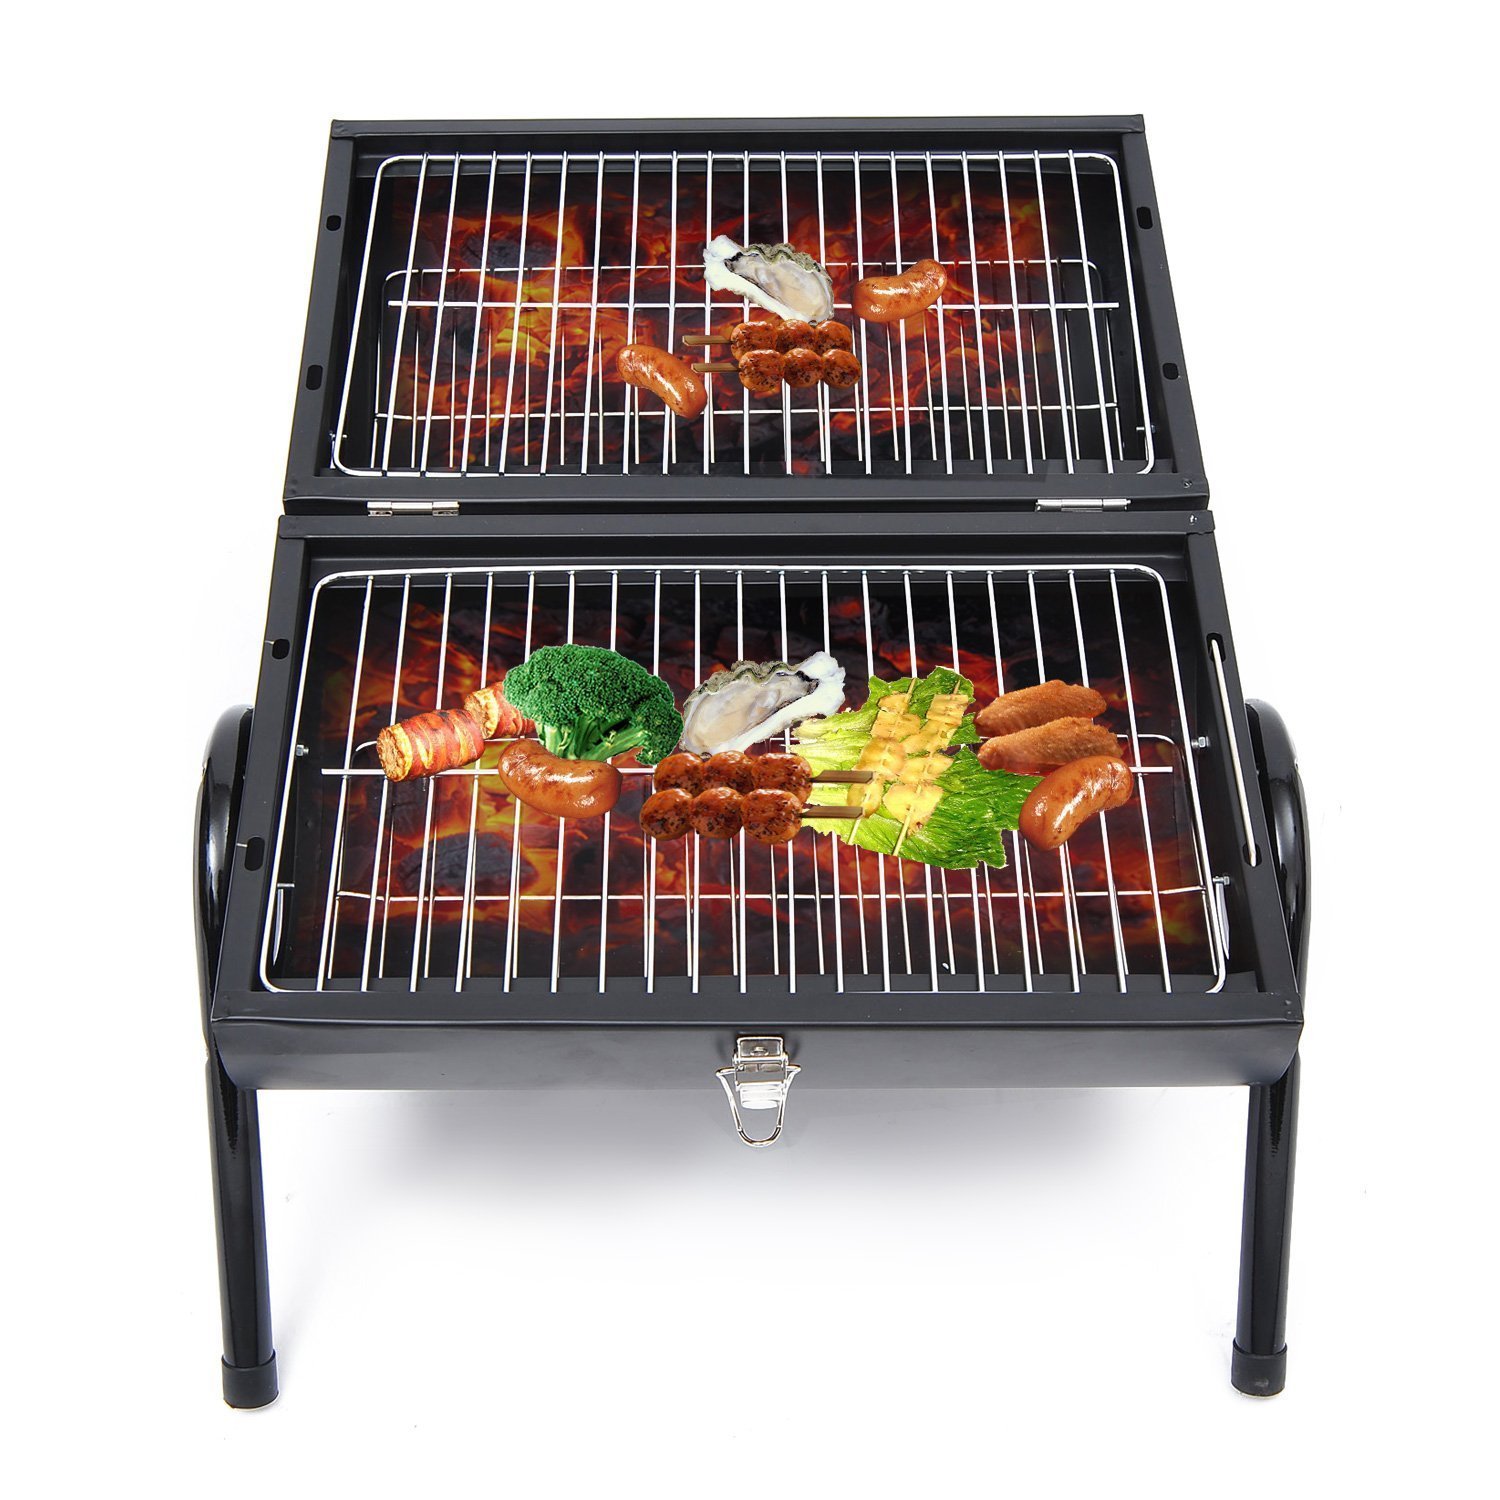 Outsunny Charcoal Grill Portable Folding Charcoal Bbq Grill Outdoor Tabletop Barbecue Grill